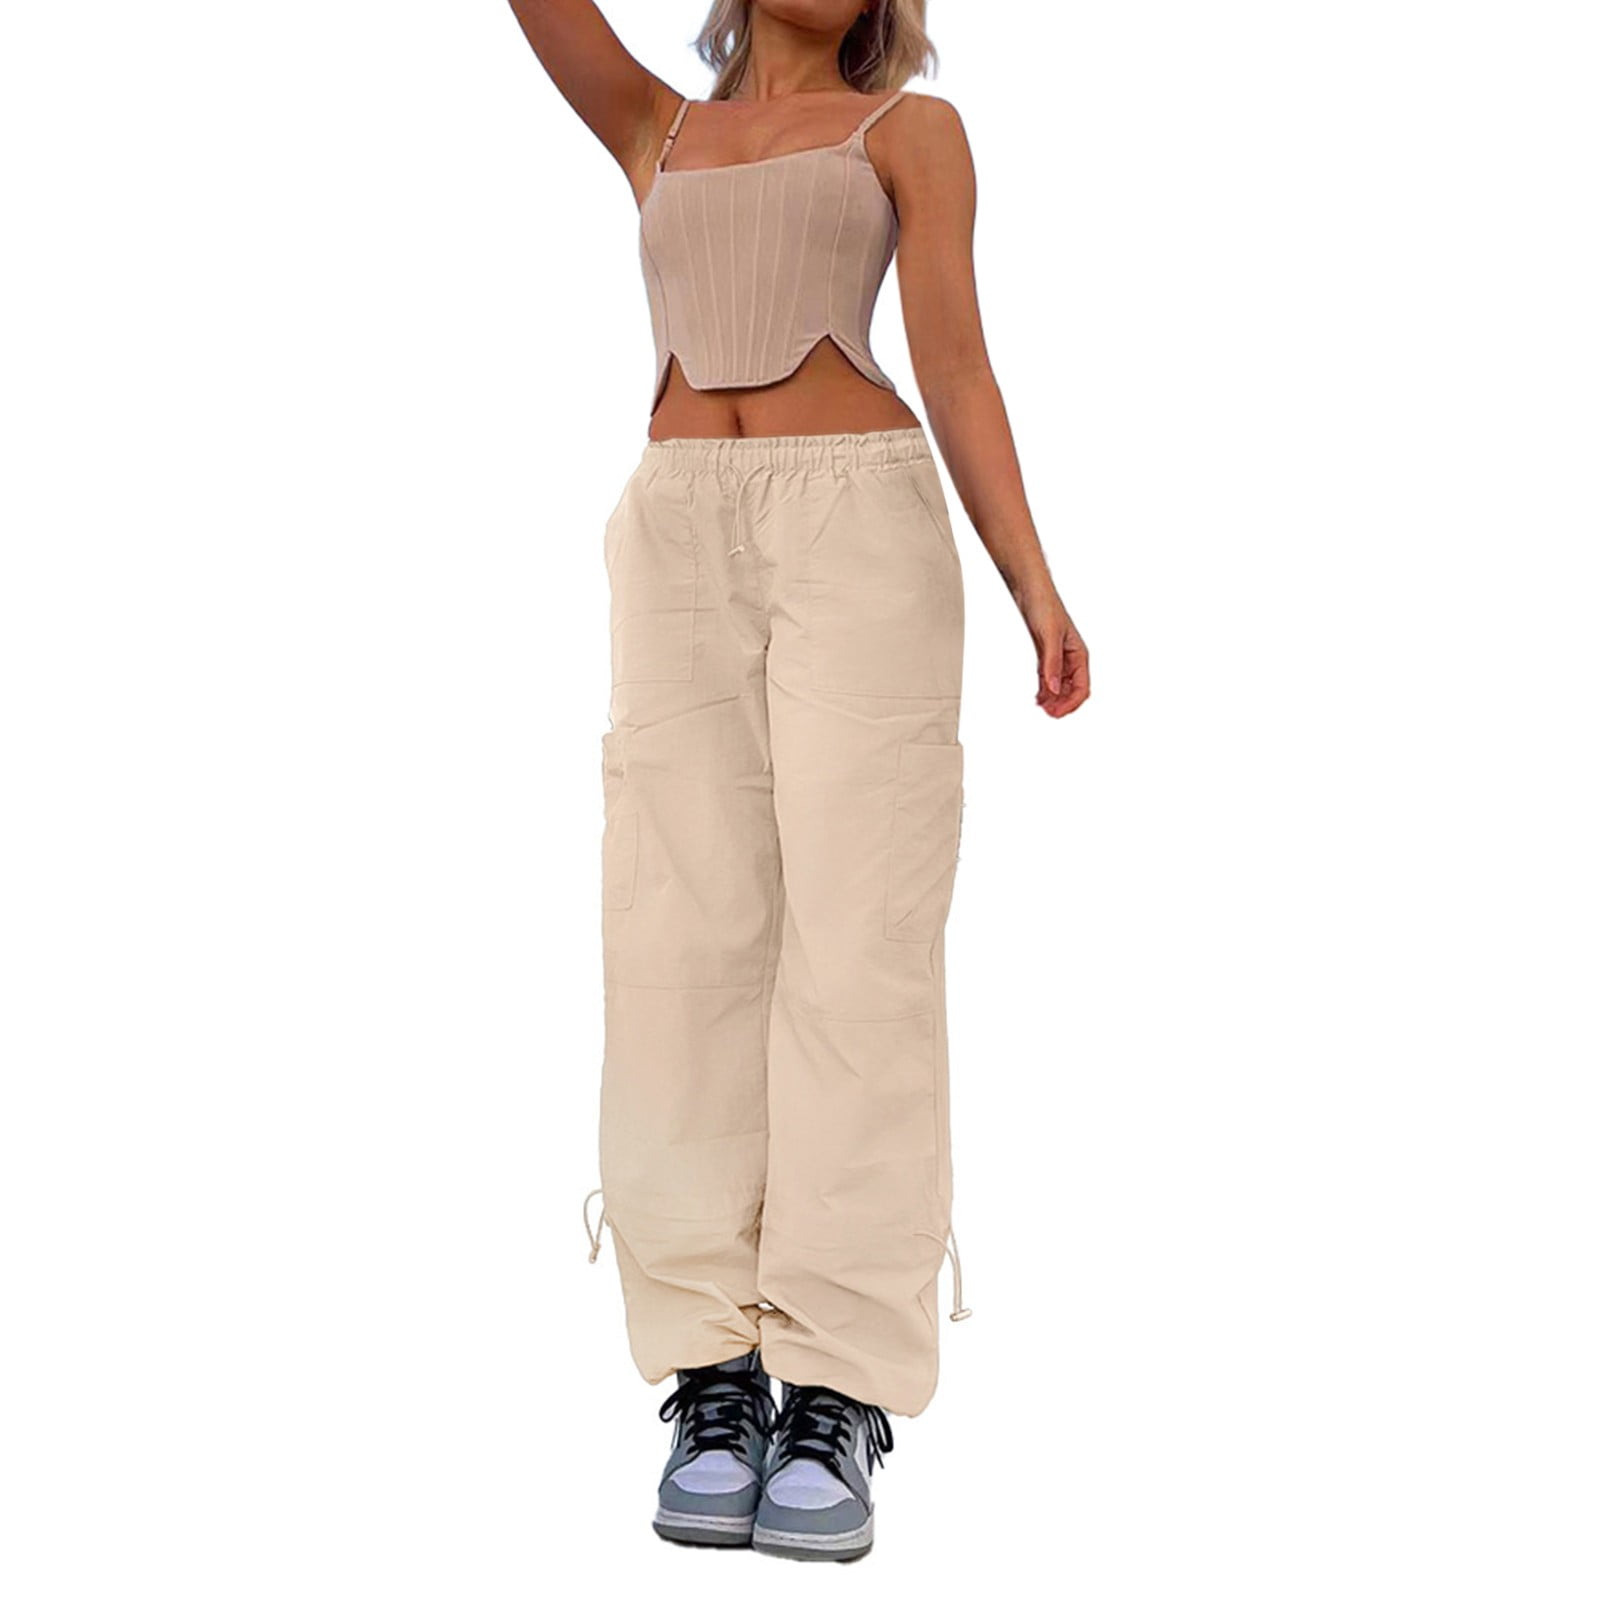 Buy Pre-Owned ASOS Womens Size 8 Casual Pants at Ubuy Qatar